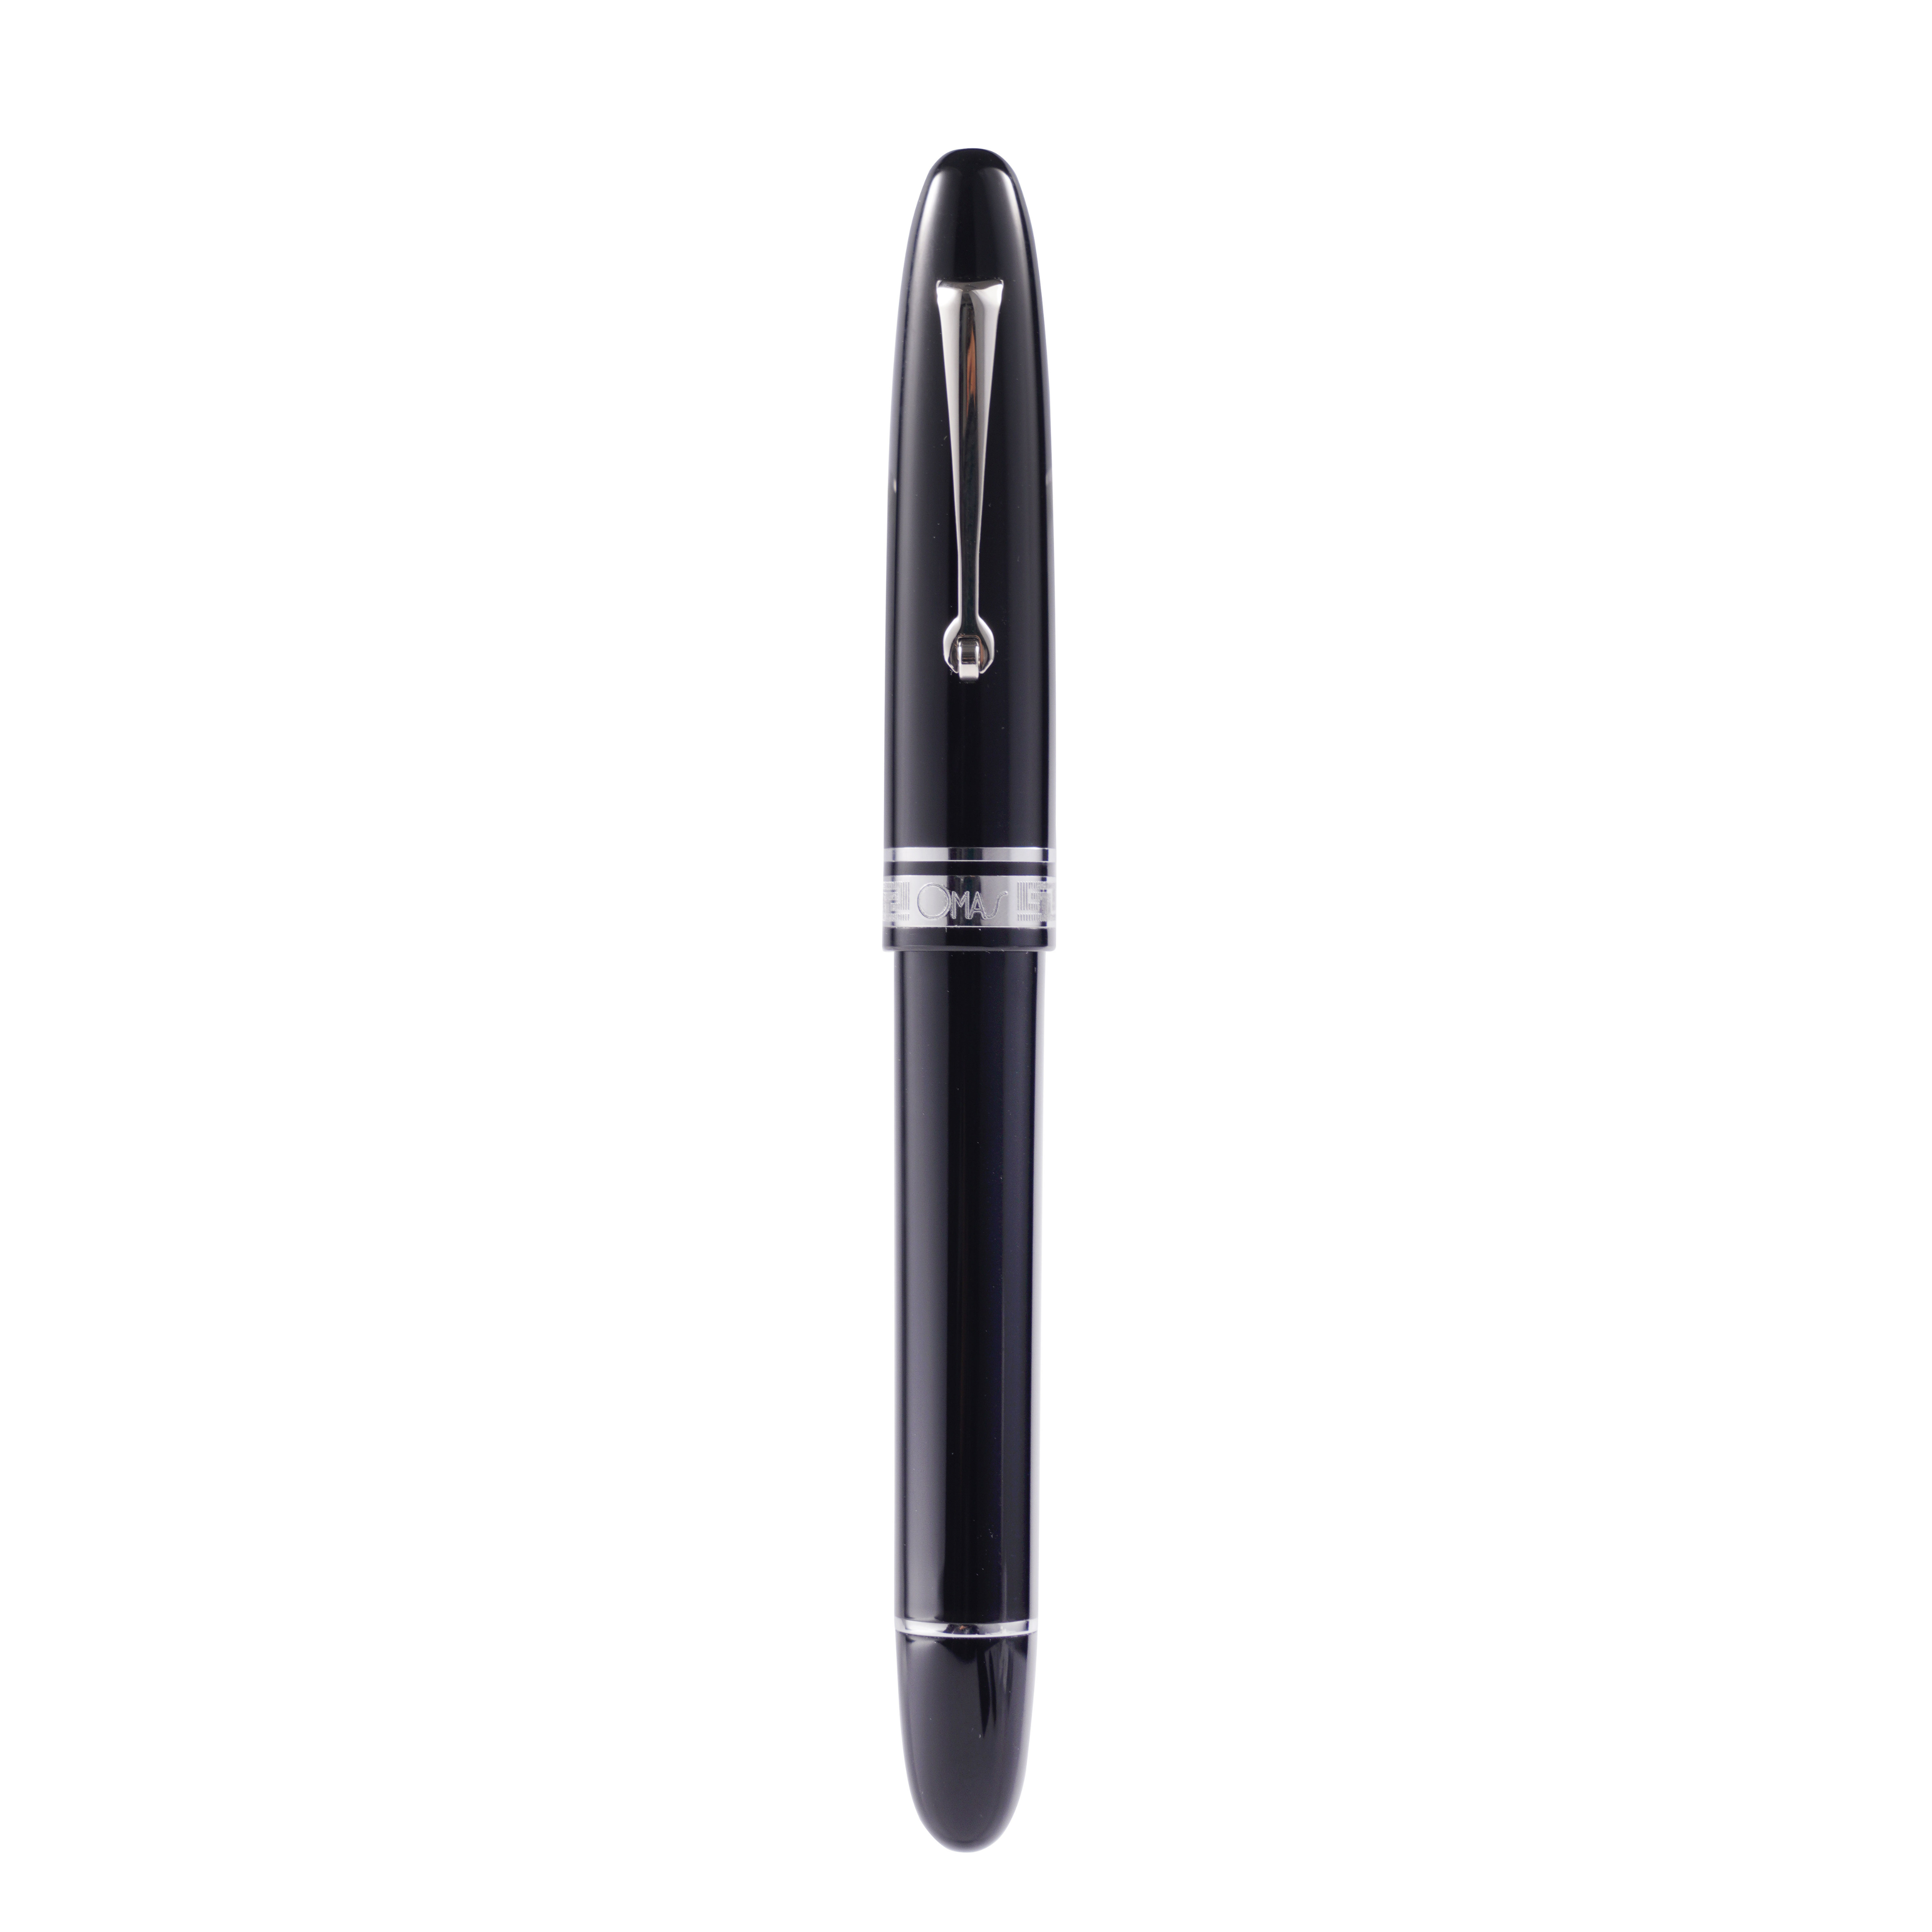 Omas Ogiva Rollerball Pen in Nera with Silver Trim